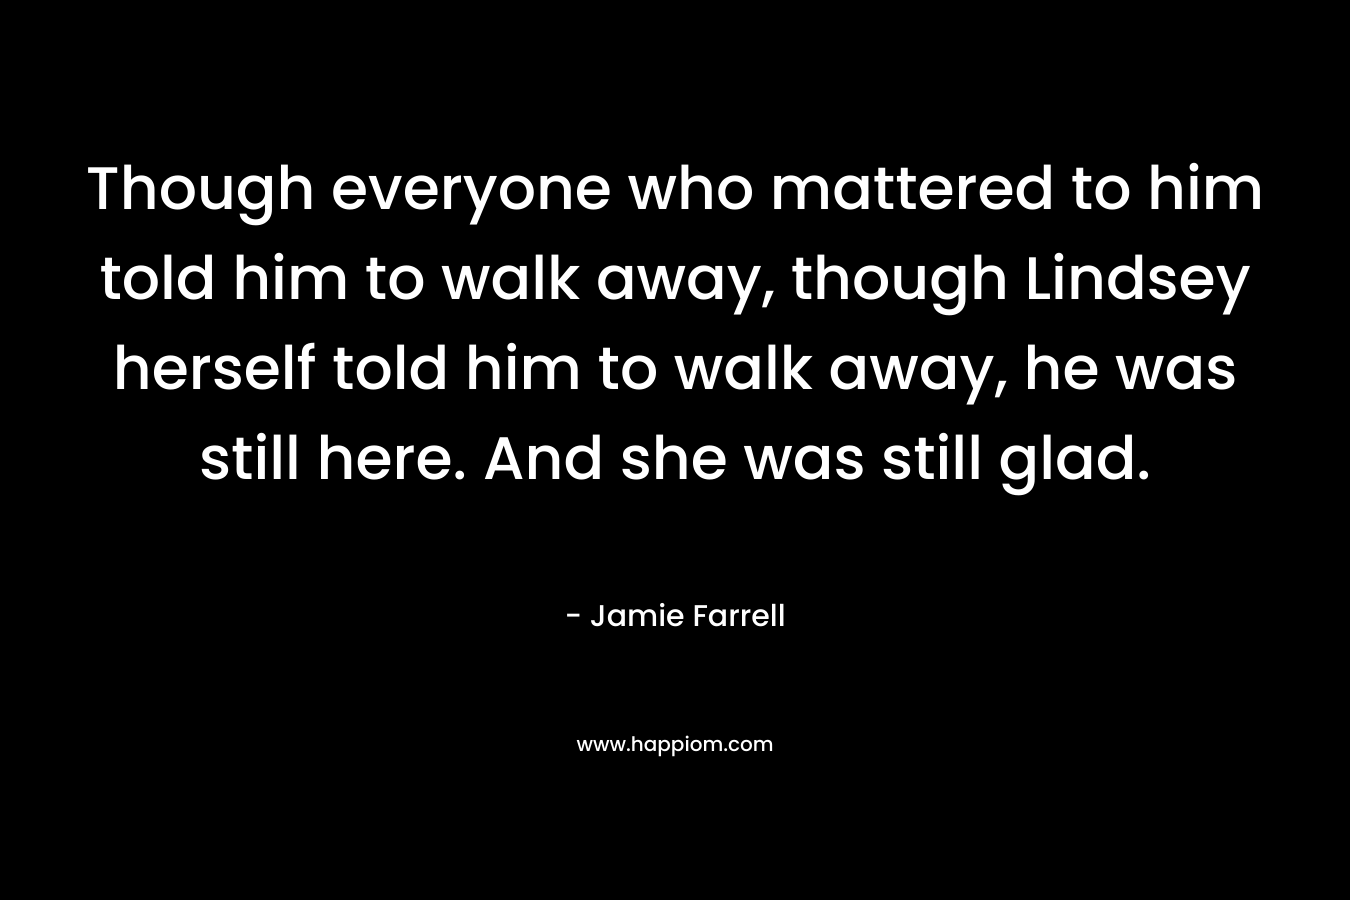 Though everyone who mattered to him told him to walk away, though Lindsey herself told him to walk away, he was still here. And she was still glad. – Jamie Farrell